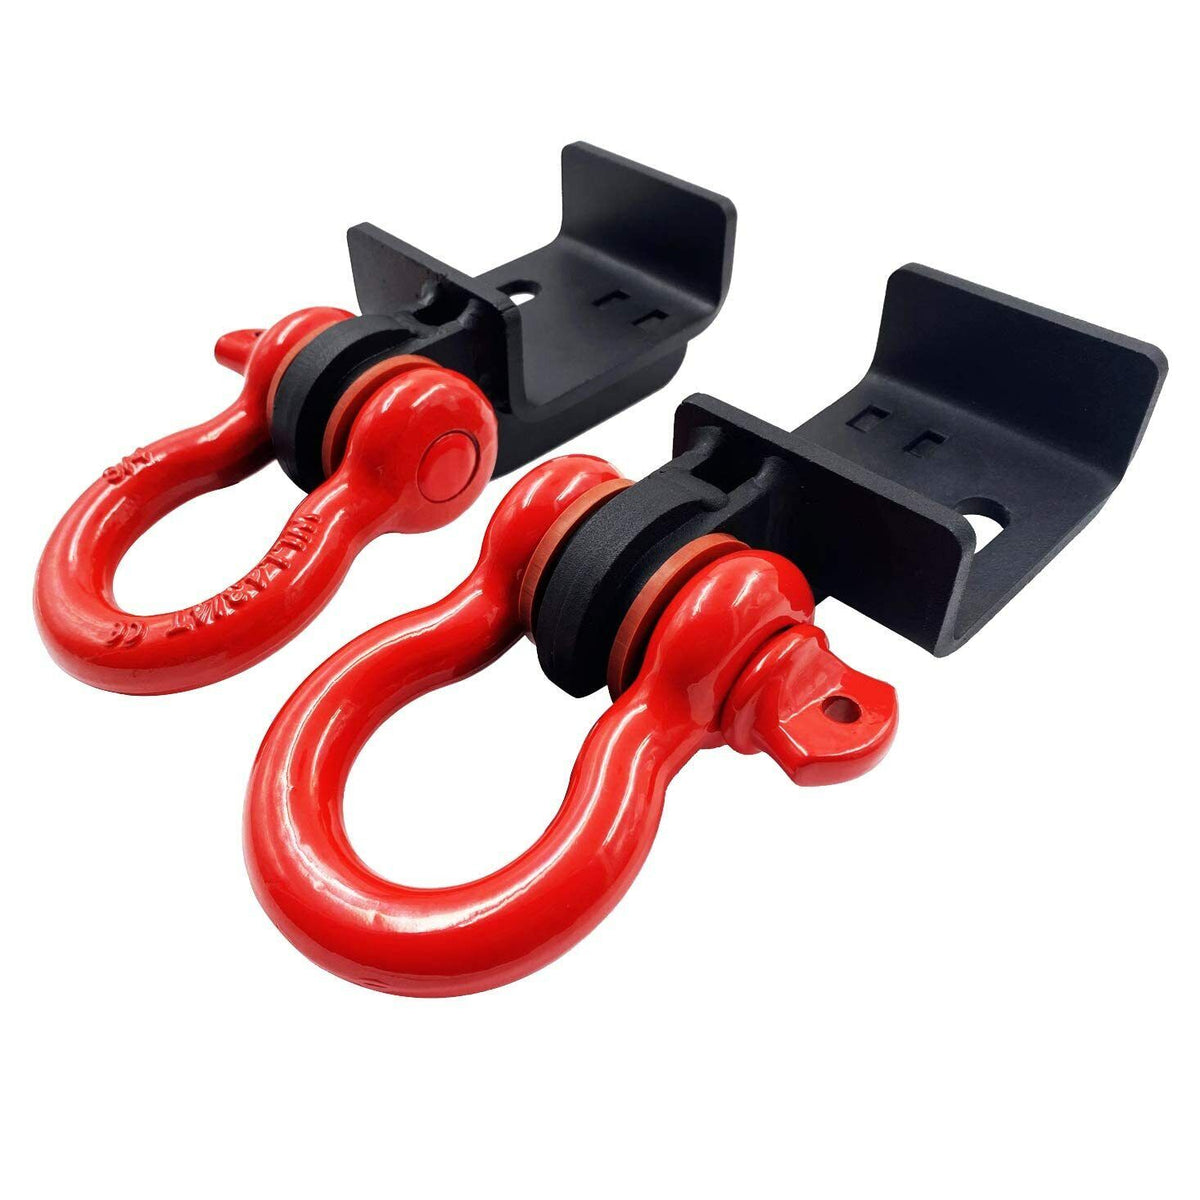 Pair Tow Hooks Heavy Duty 3/4 Inch D Ring Shackle Bumper Mounted